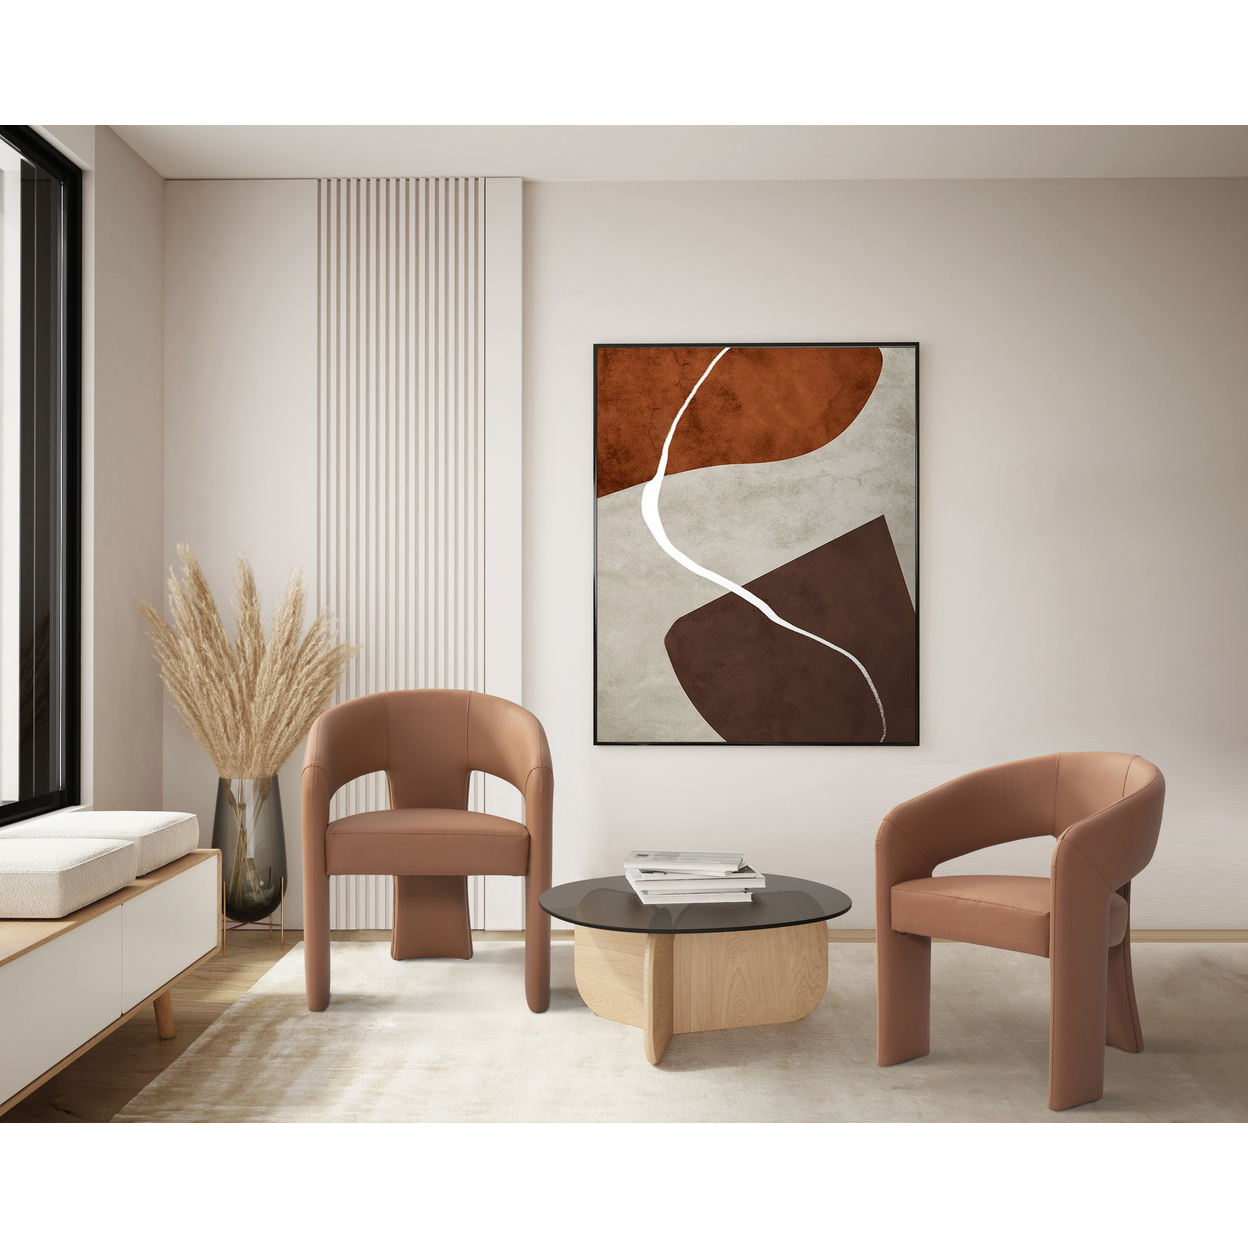 Iconic Home Schnider Dining Chair Faux Leather Upholstered Curved Seat Back Sculptural Base (1 Piece), Modern Contemporary - Camel